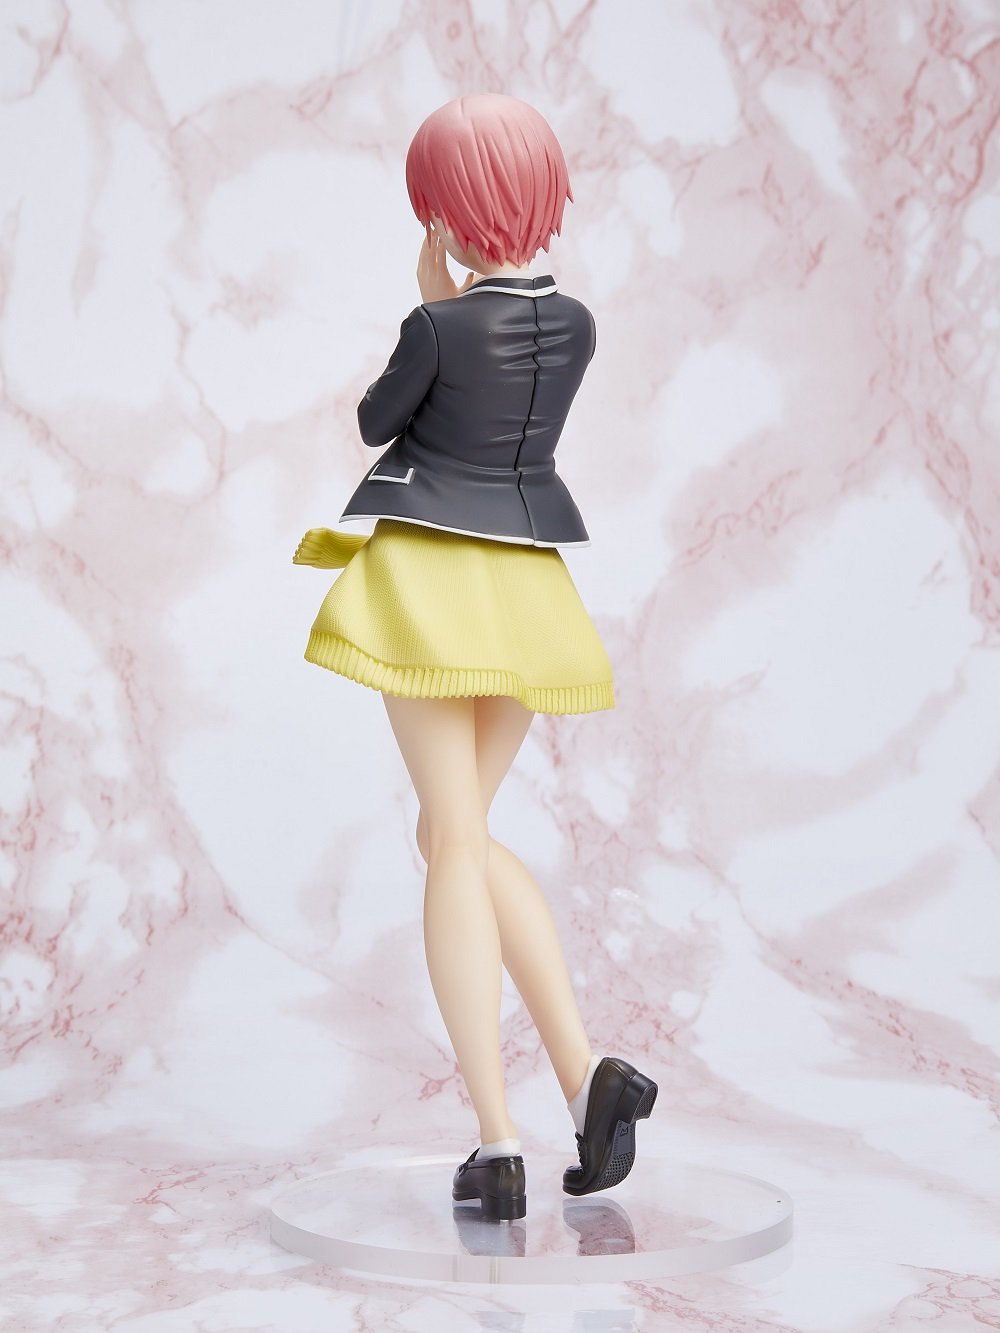 The Quintessential Quintuplets - Ichika Nakano Prize Figure (Uniform Ver.) image count 3